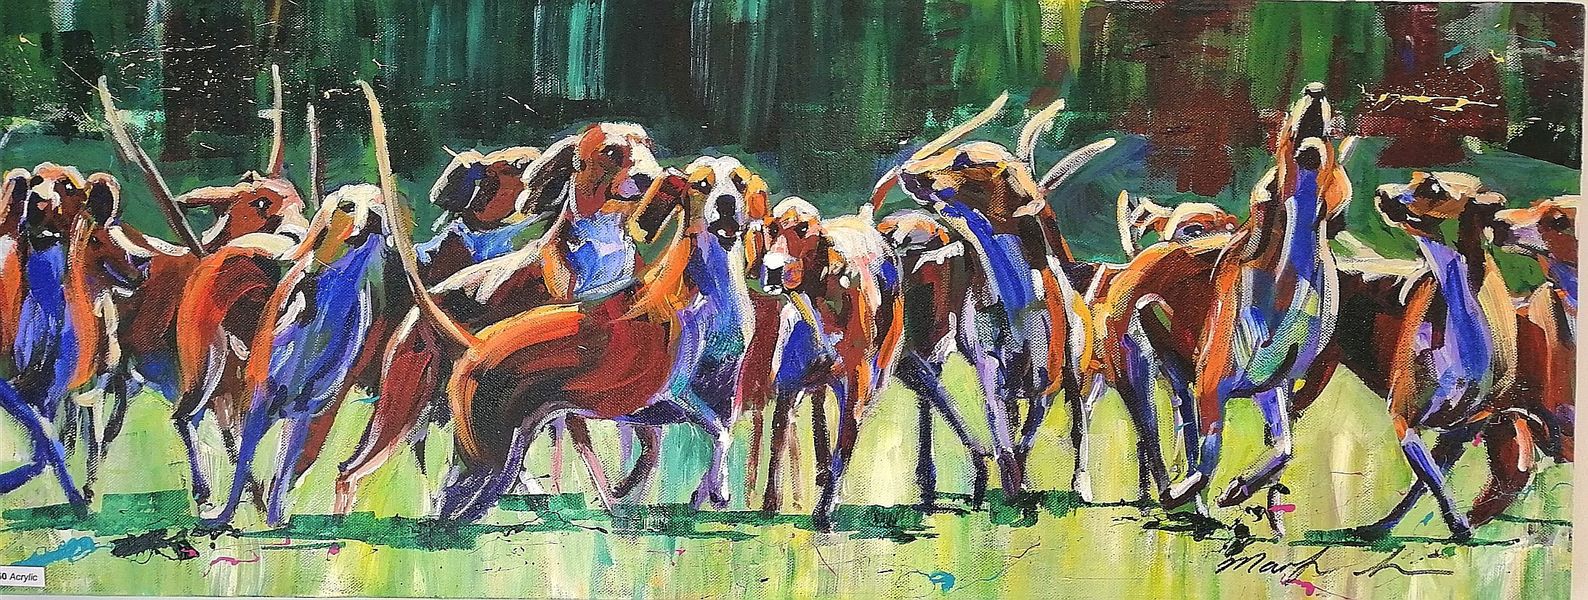 Hounds in acrylic